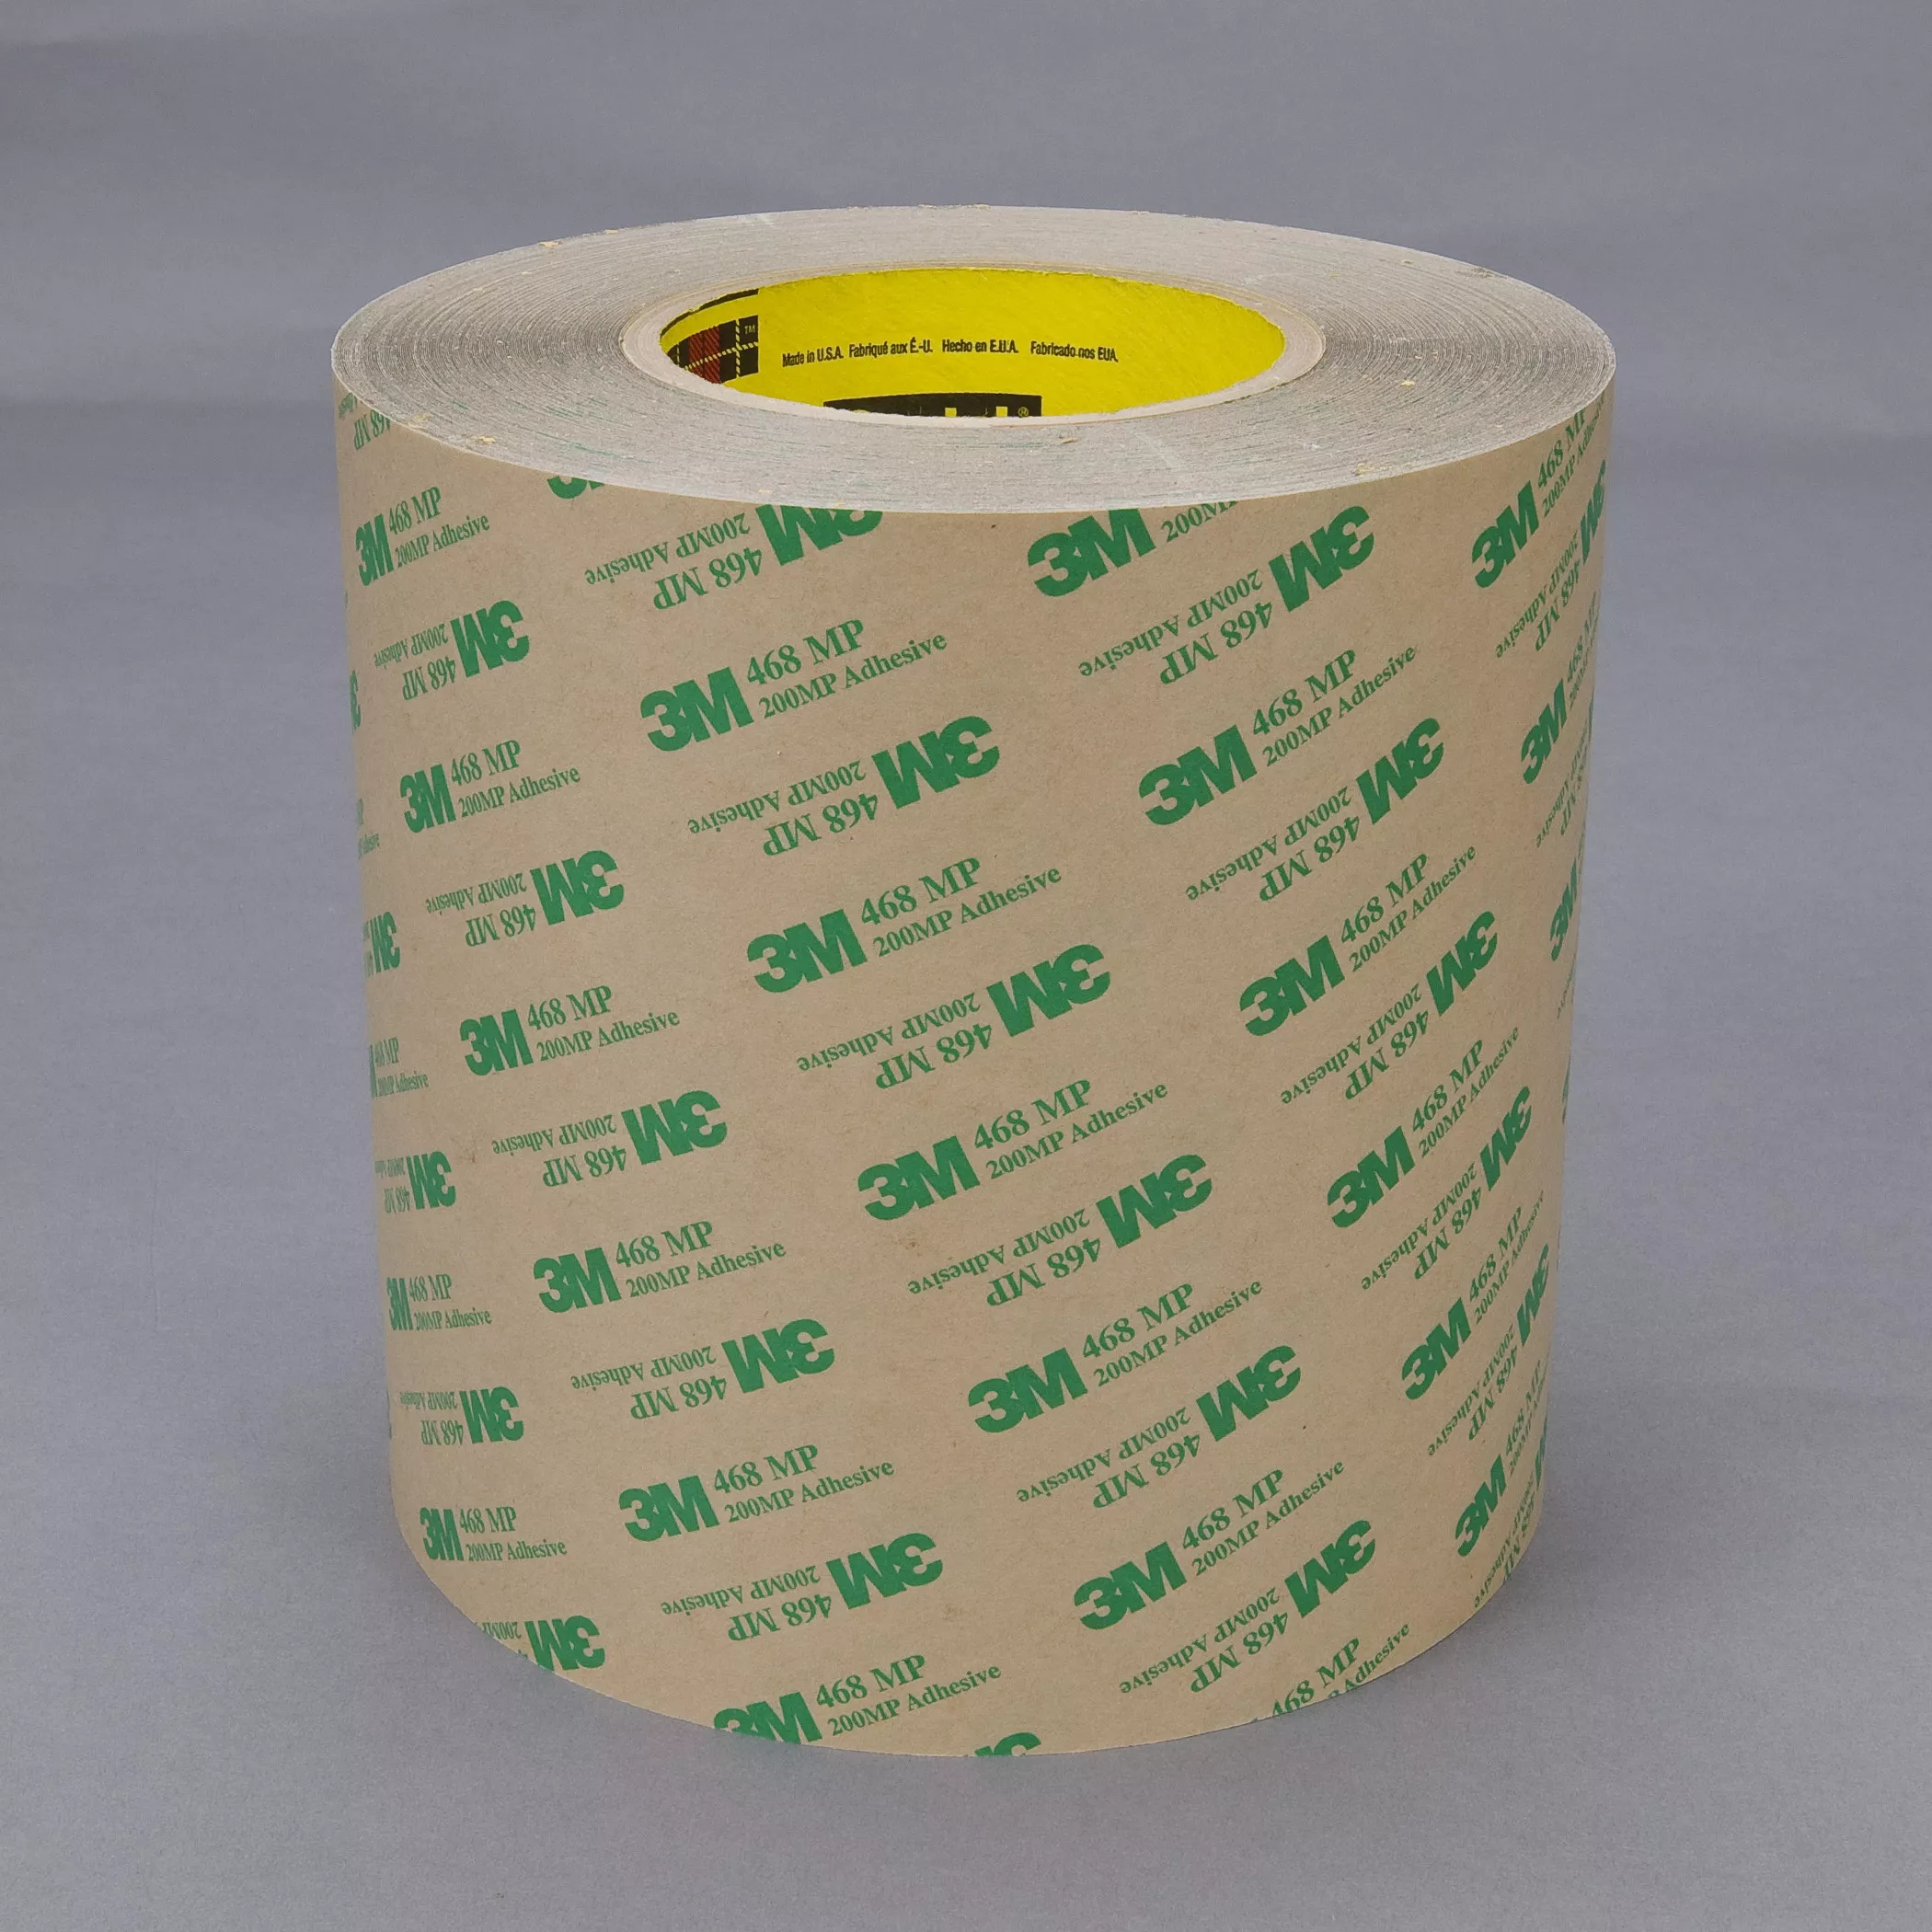 3M™ Adhesive Transfer Tape 468MP, Clear, 13 in x 60 yd, 5 mil, 4 rolls
per case